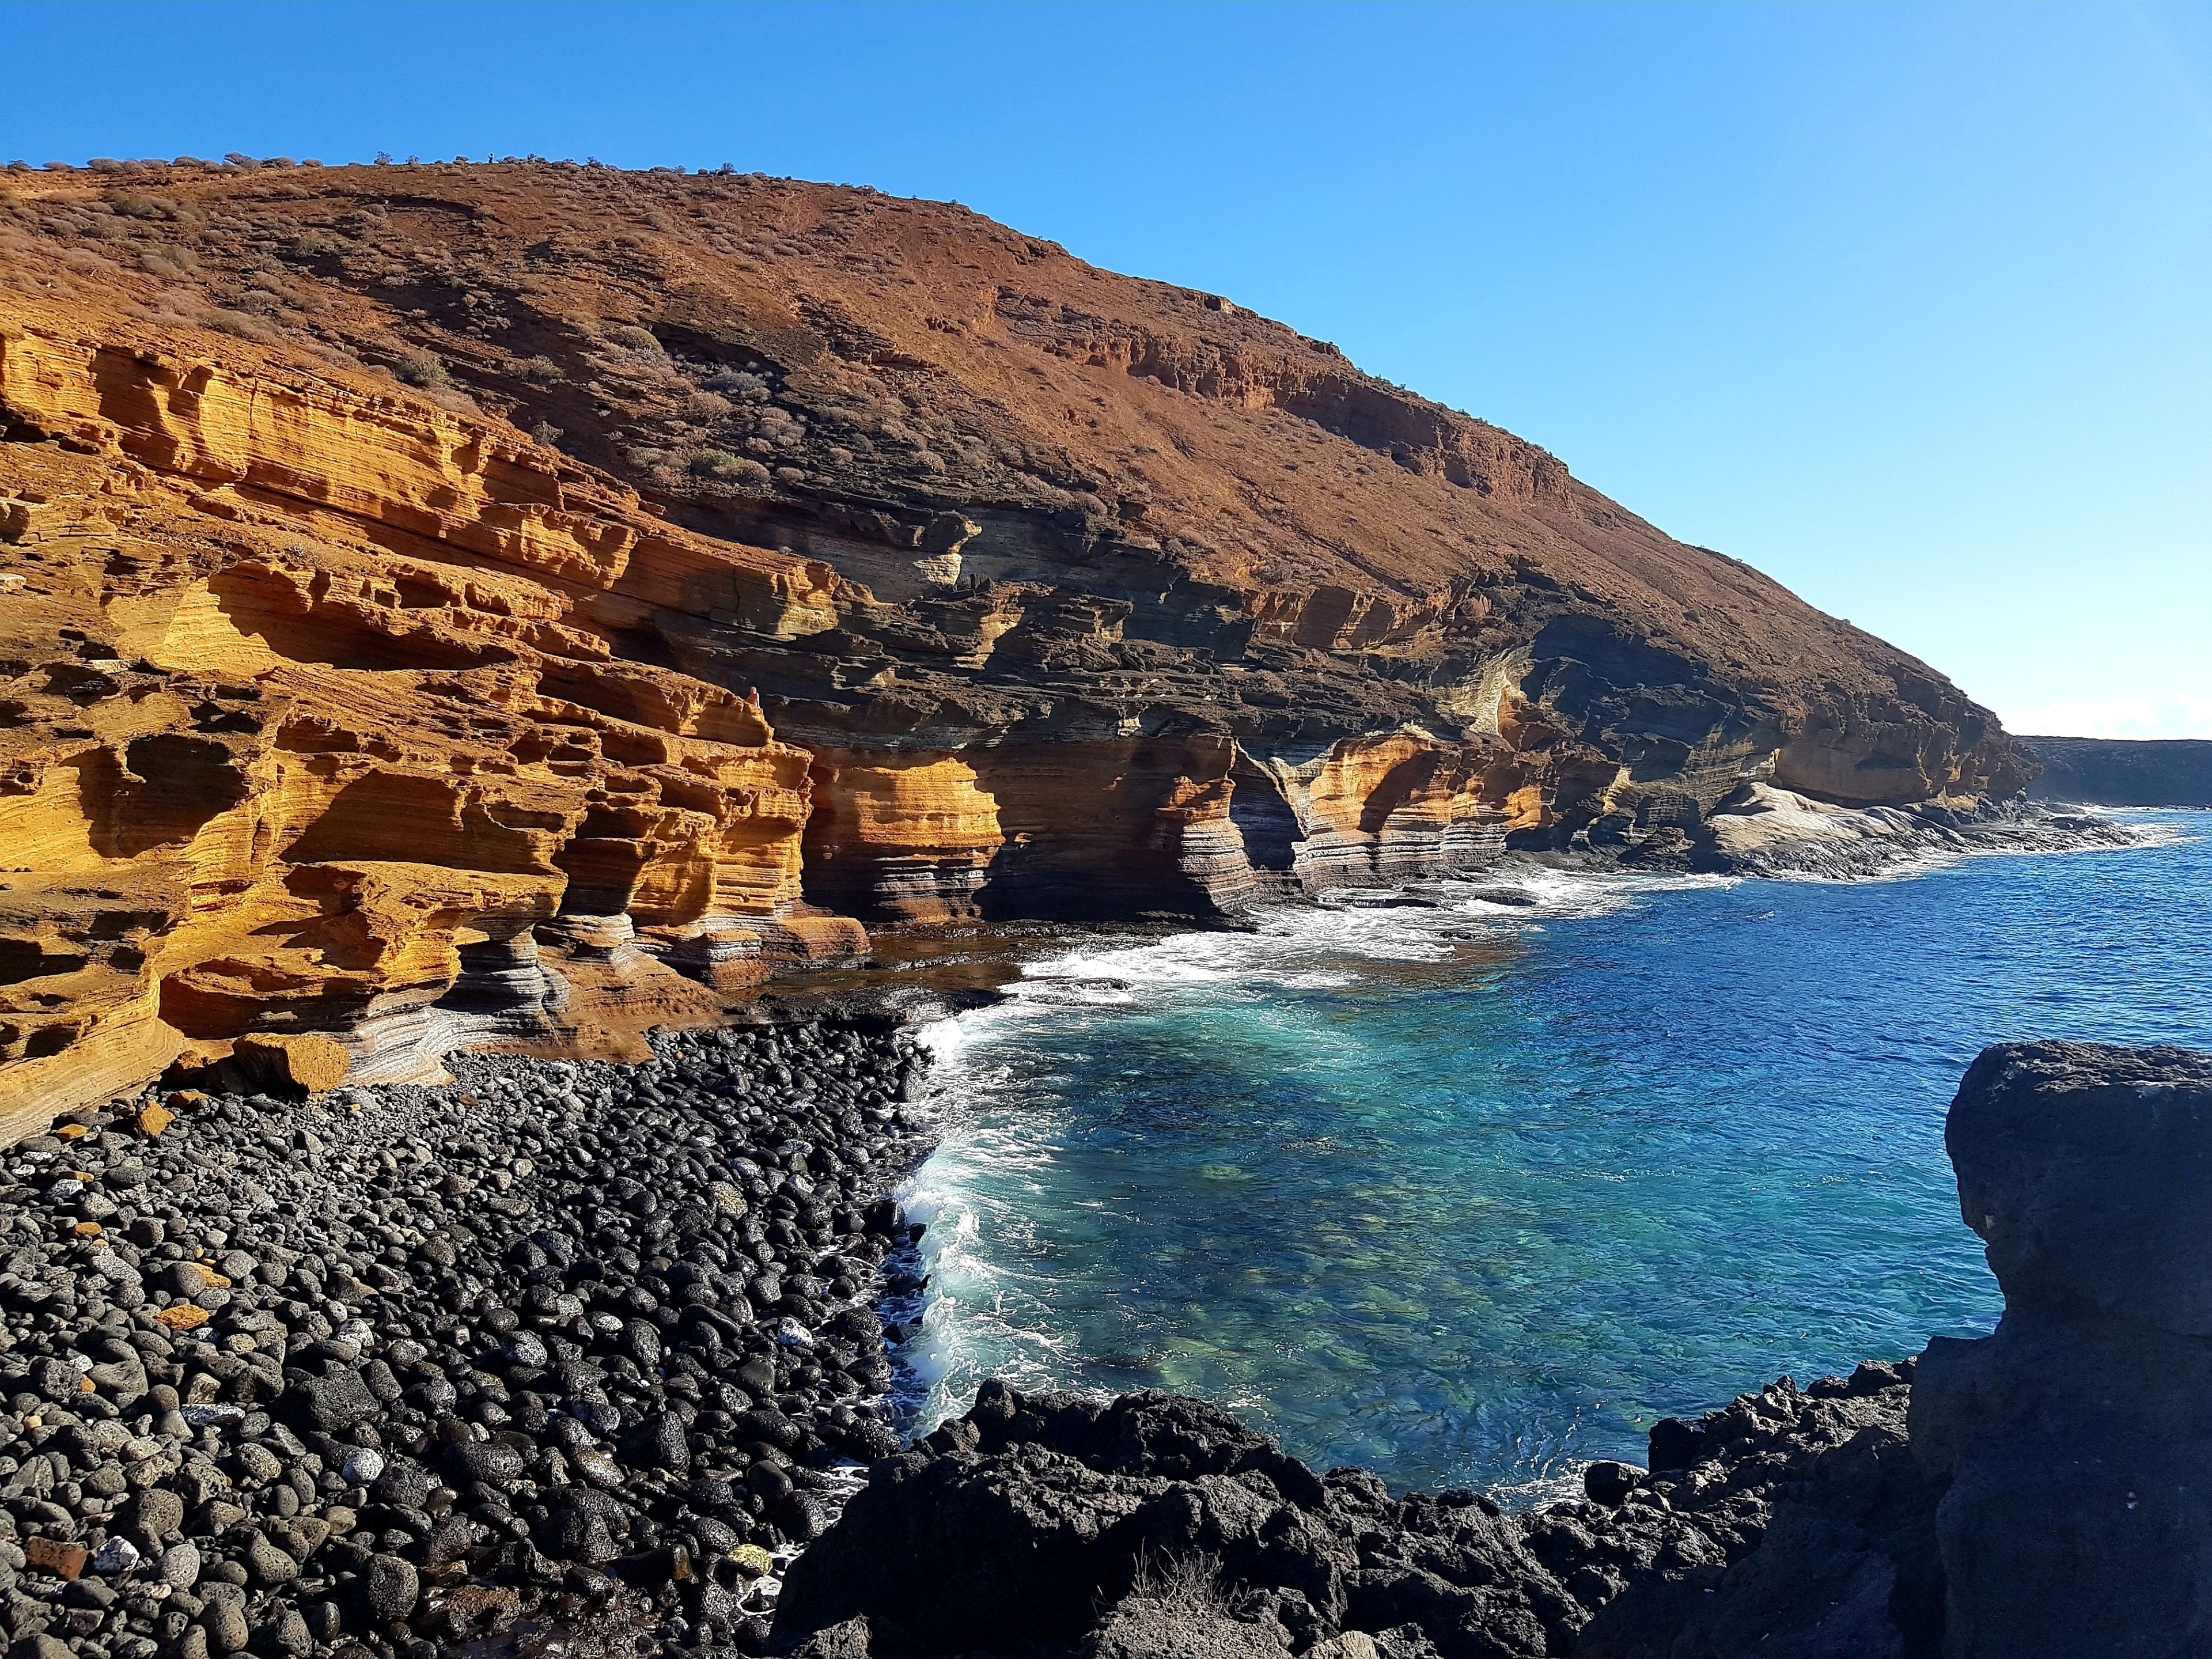 After many trips to the beautiful island of Tenerife I finally got to visit Costa del Silencio where this ' beach ' is located. We were lucky to be blessed with clear blue skies and crystal clear water to view this natural beauty.